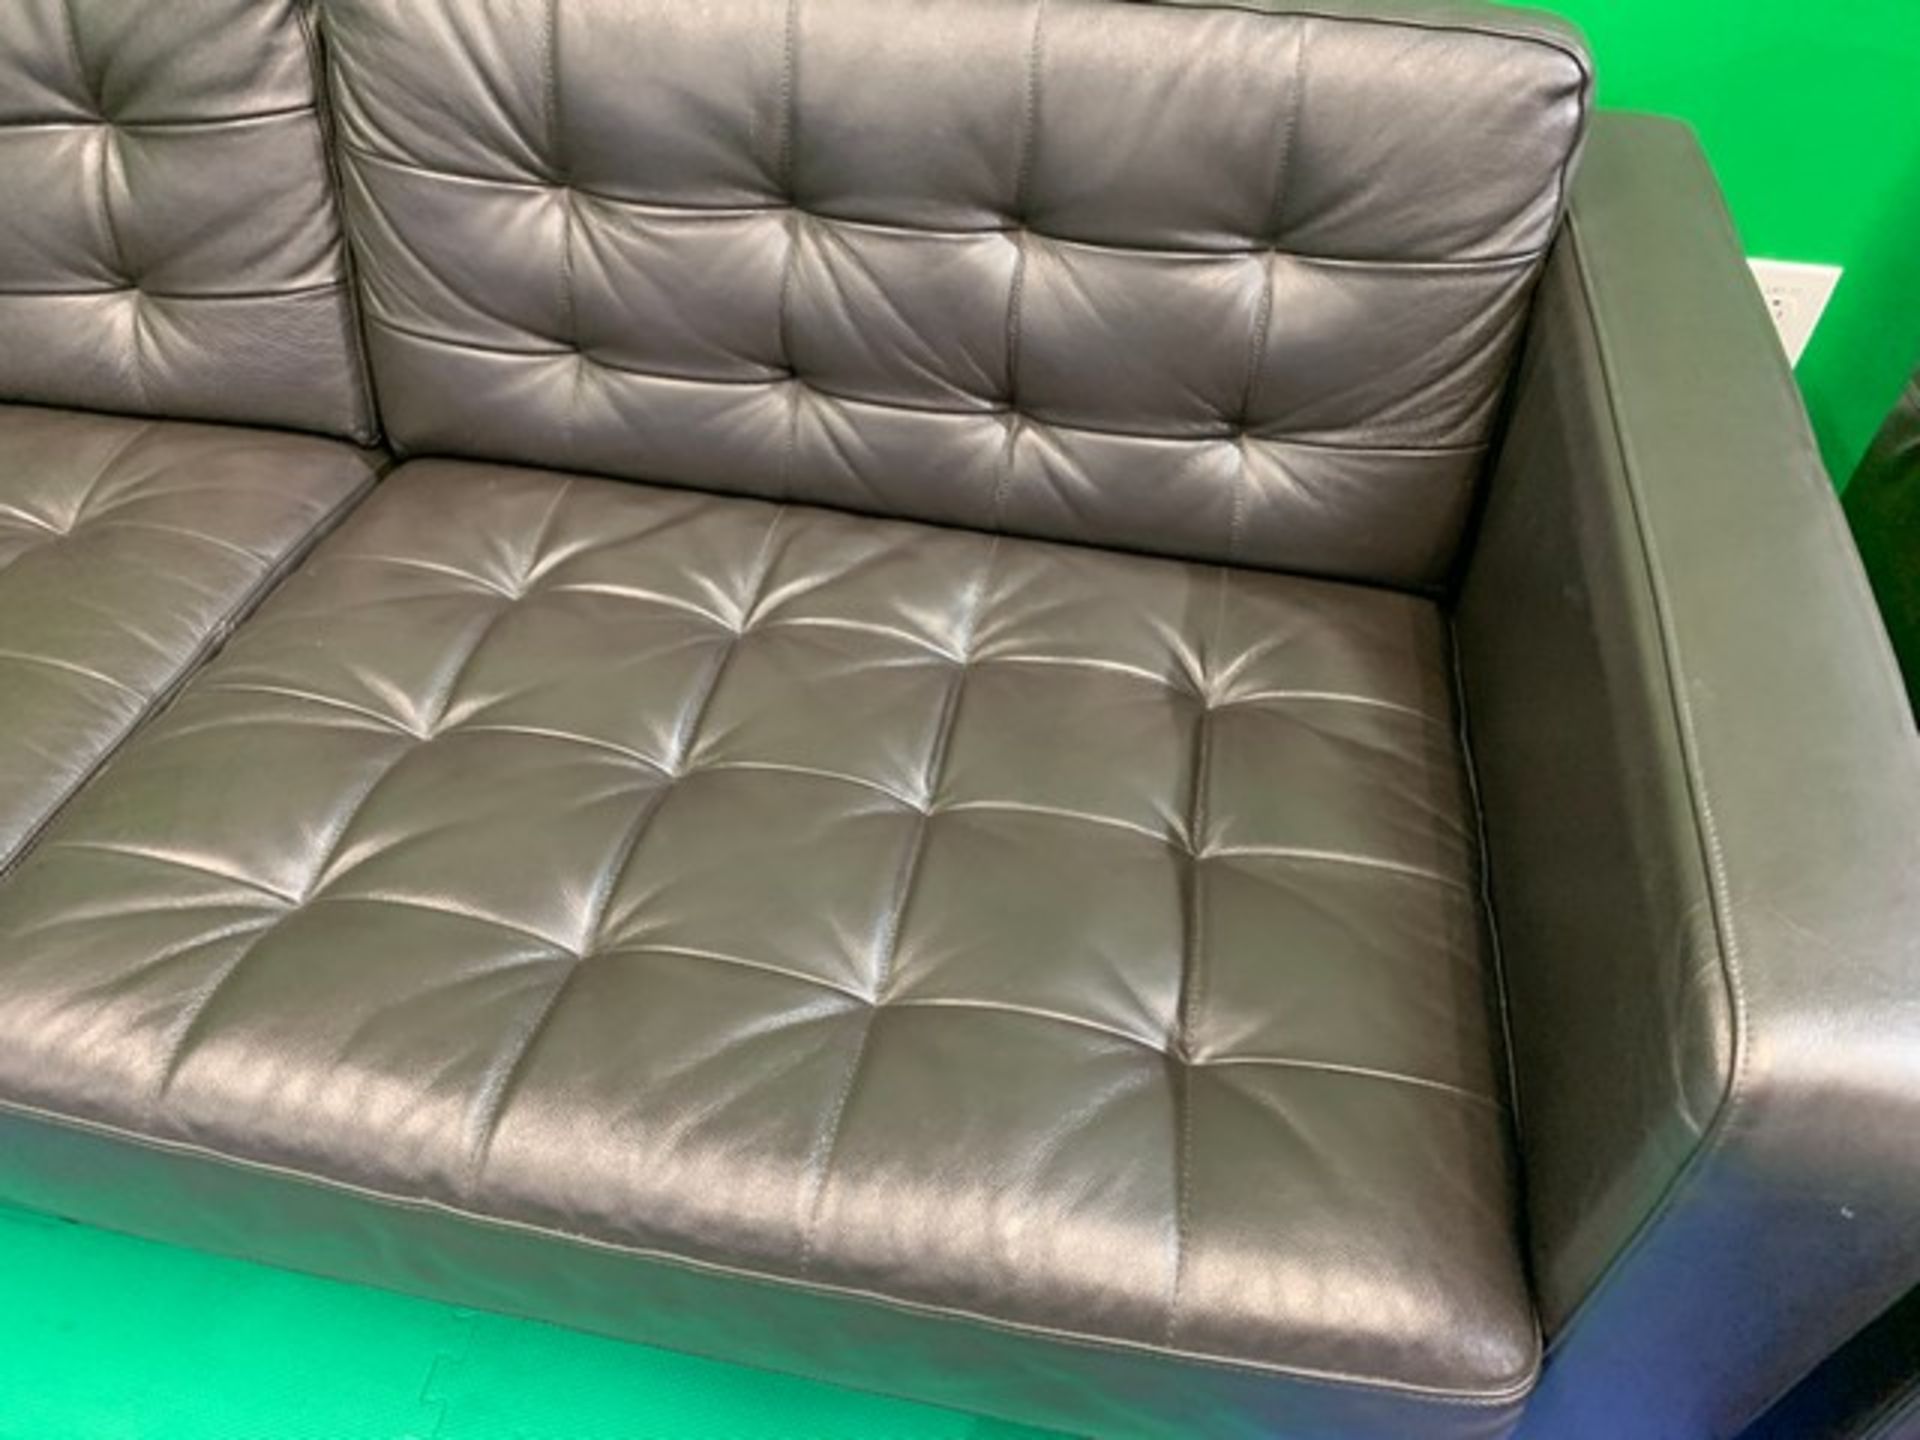 BLACK LEATHER SOFA - 81''Wx35''D - Image 2 of 2